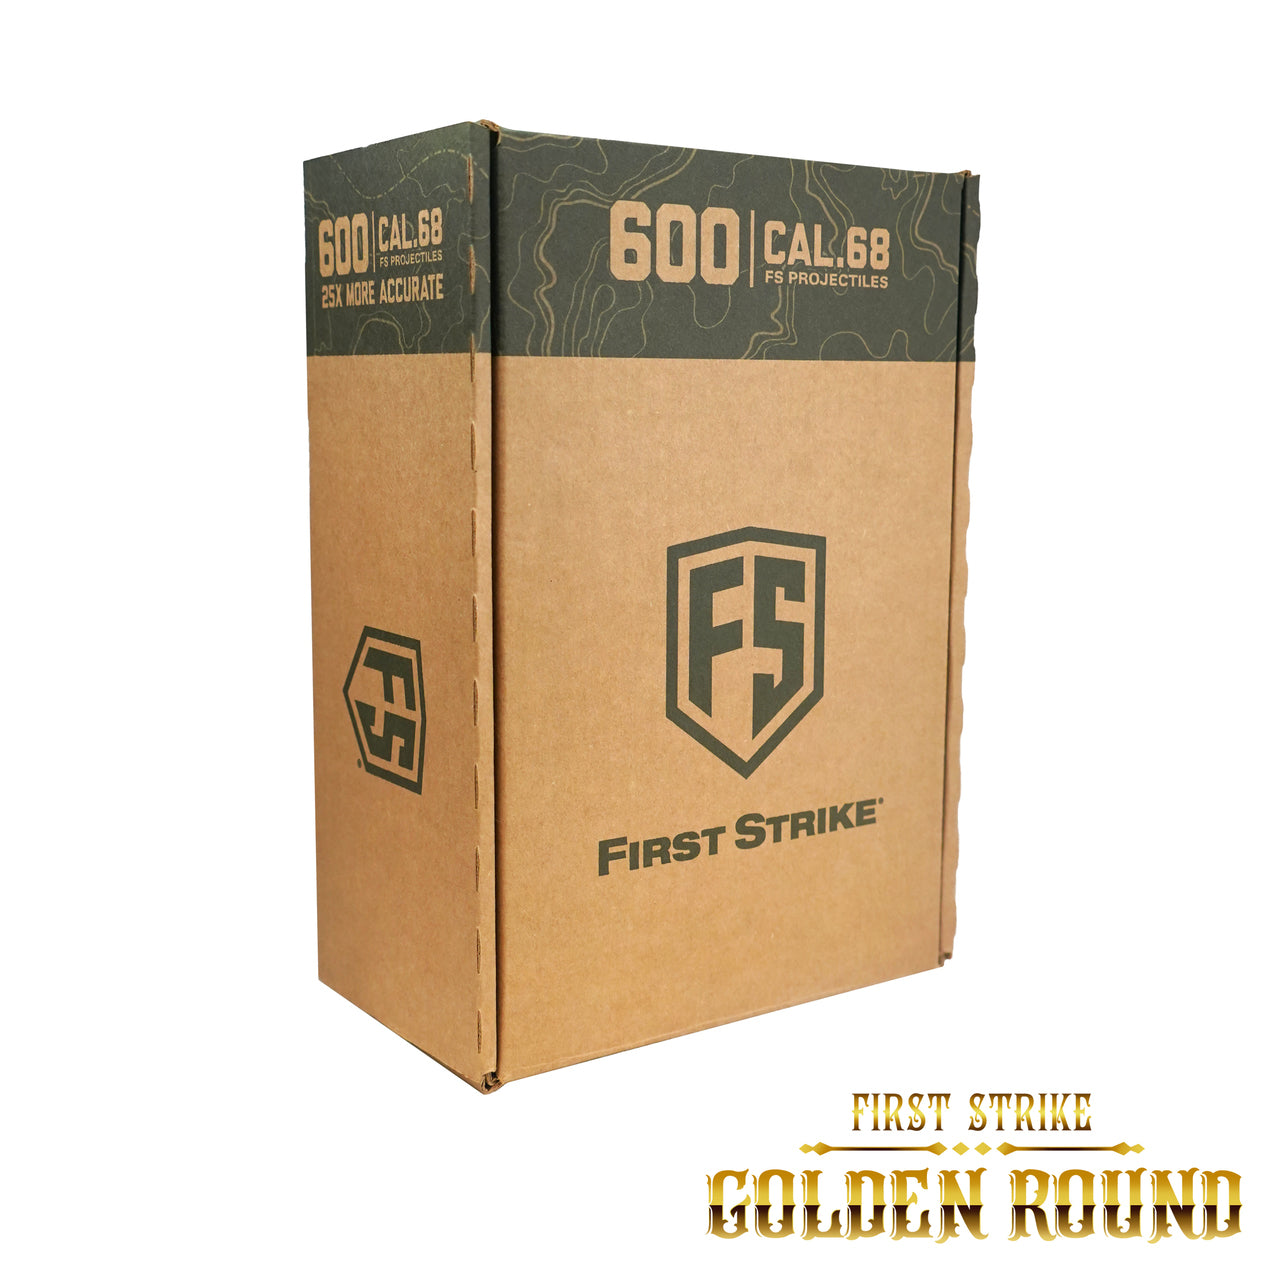 First Strike Rounds - 600 Count - Smoke/Yellow - Yellow (GOLDEN ROUND SWEEPSTAKES) - First Strike